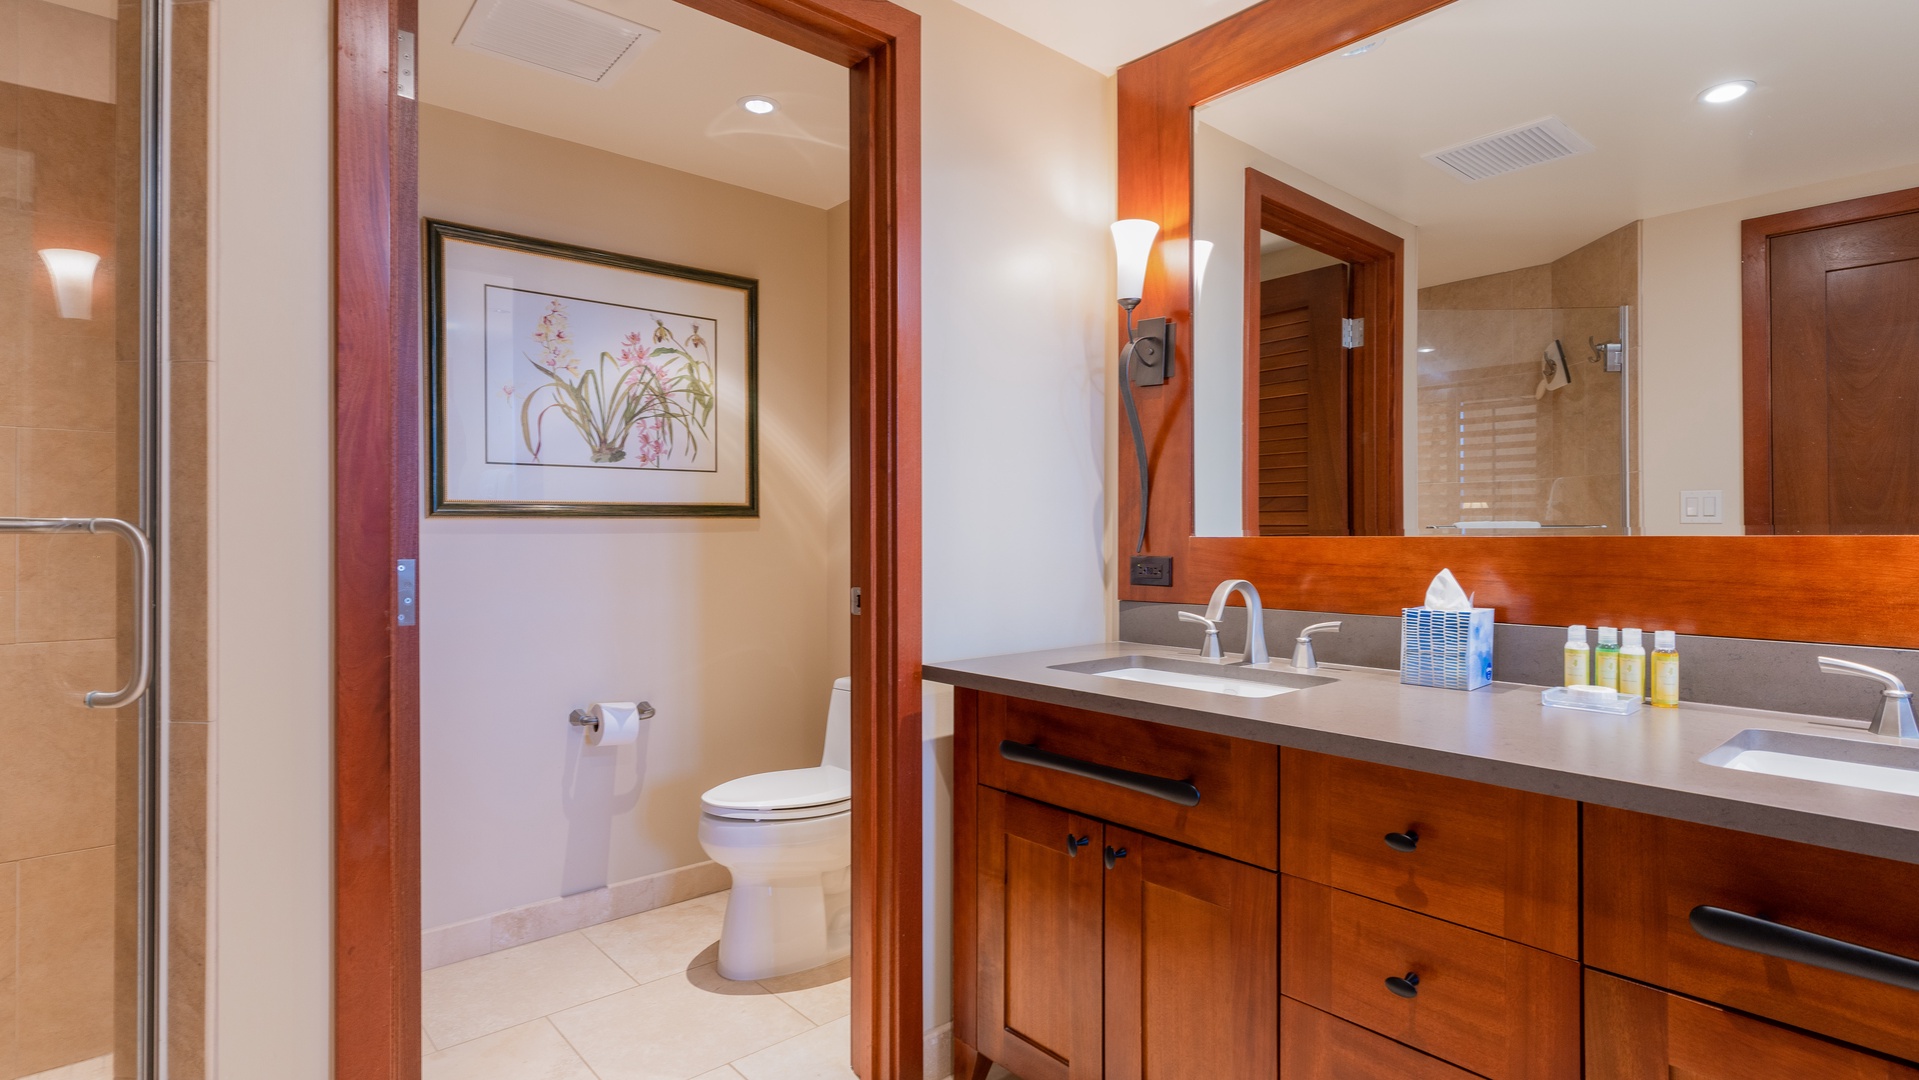 Kapolei Vacation Rentals, Ko Olina Beach Villas B701 - The primary guest bathroom has a double vanity and framed art.